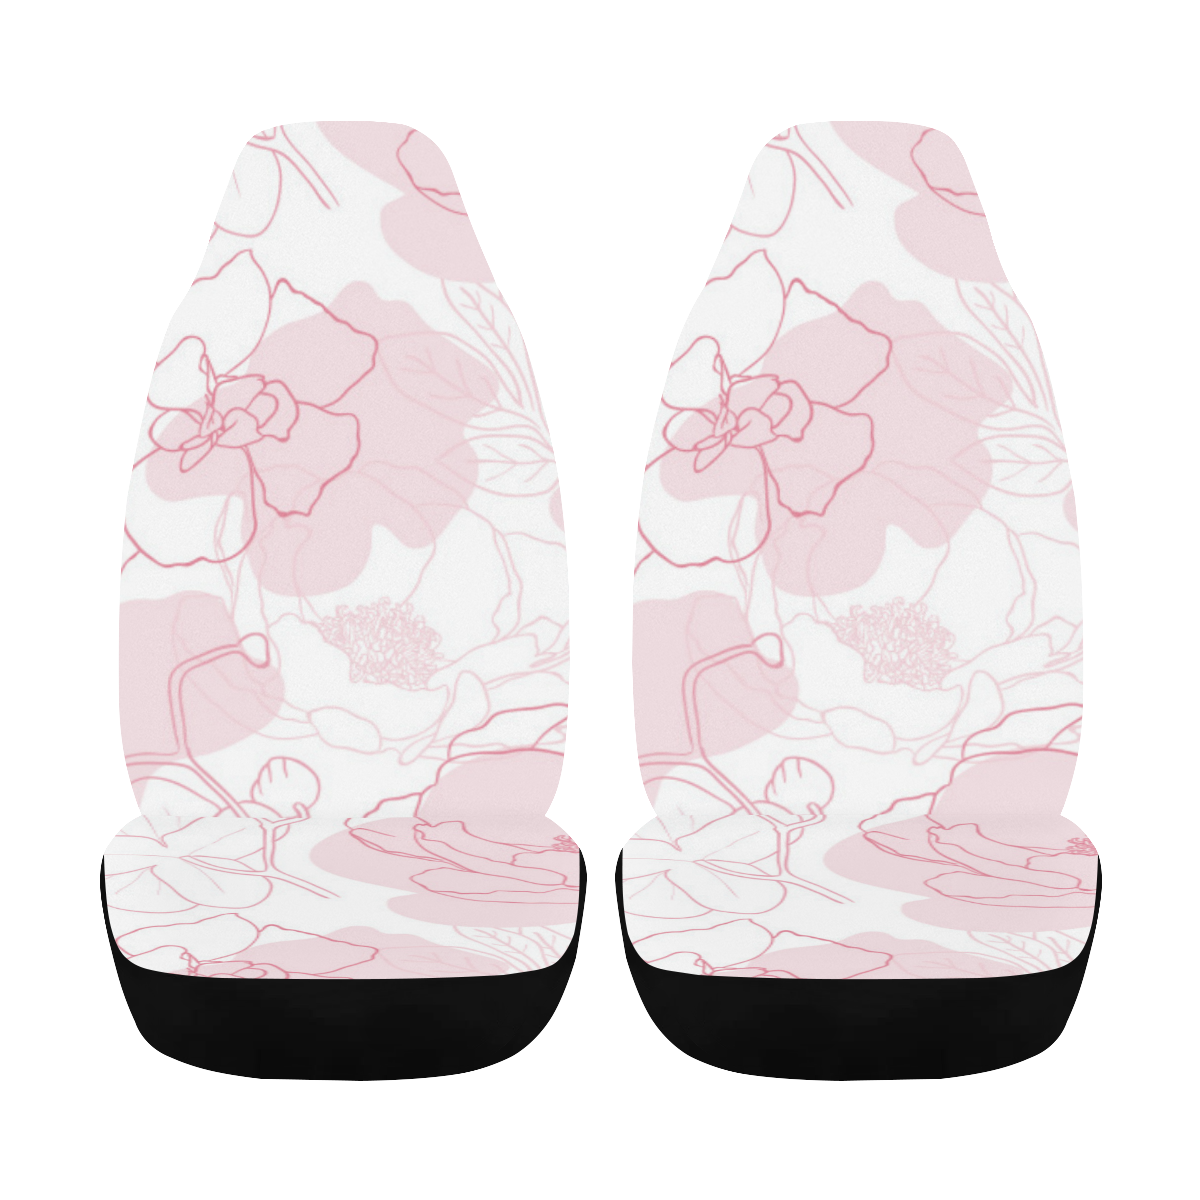 Peonies Cover, Pink Flowers Car Seat Cover Airbag Compatible (Set of 2)